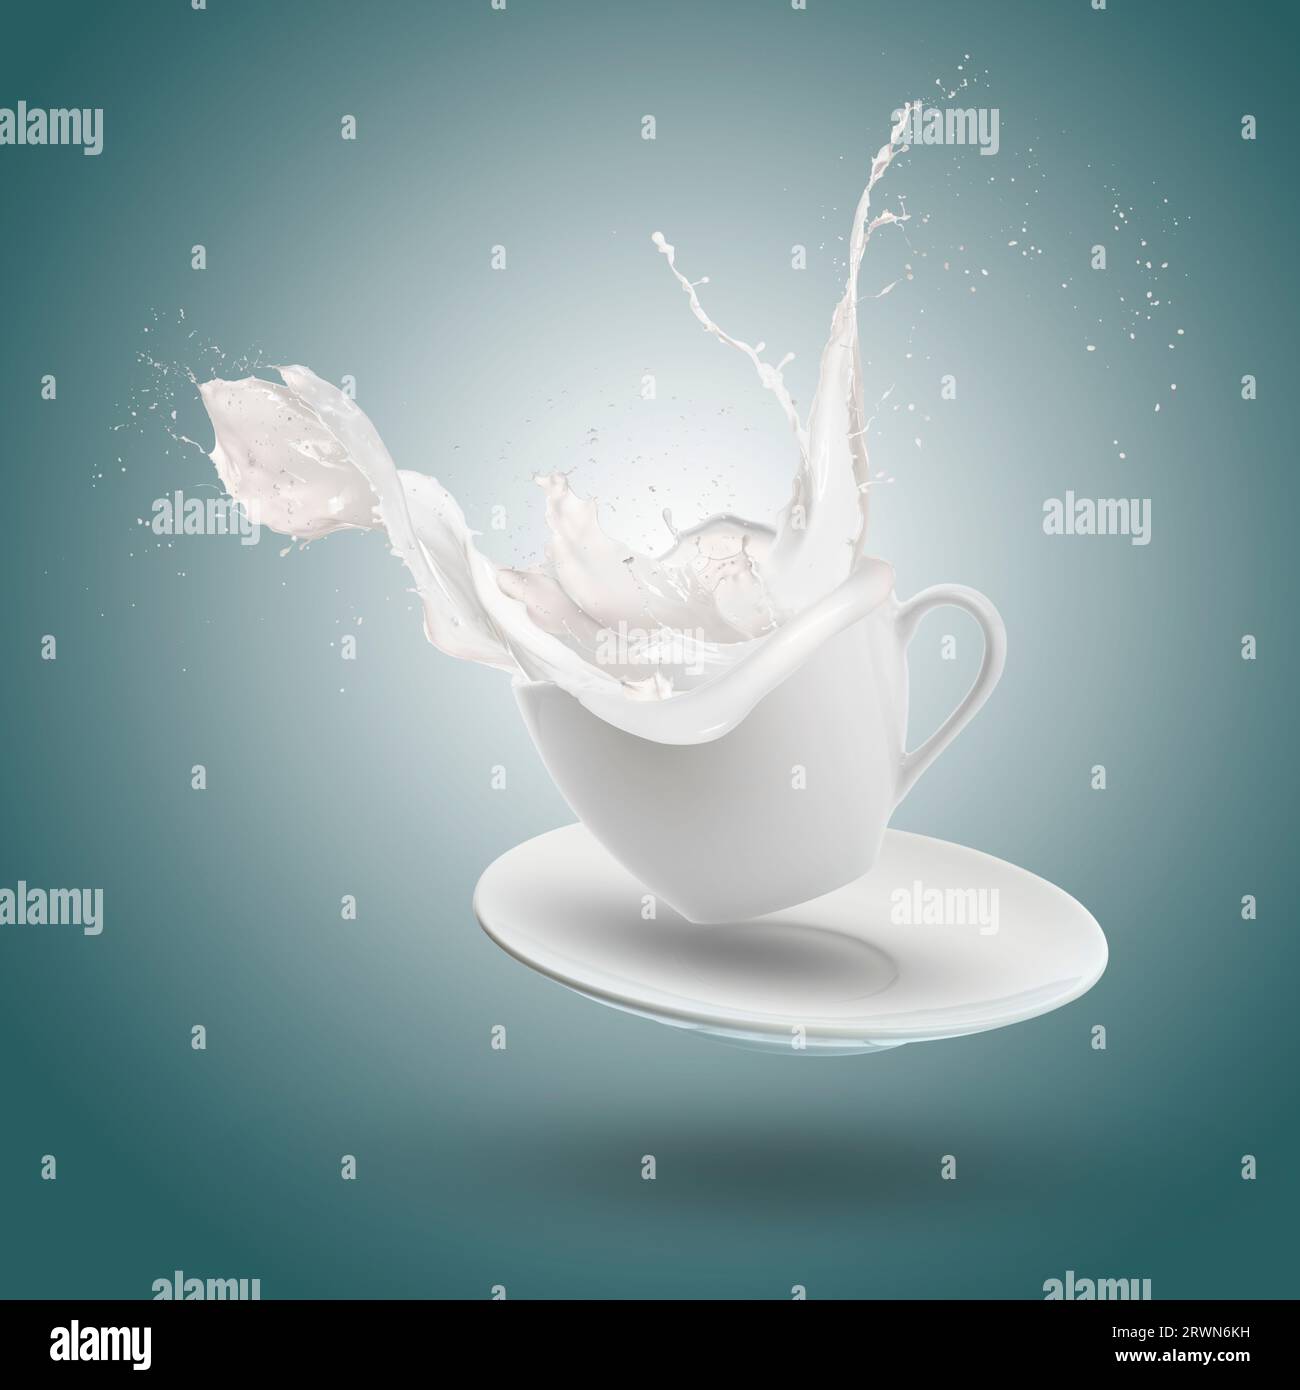 Milk wave splashing out of cup on blue background. Stock Photo